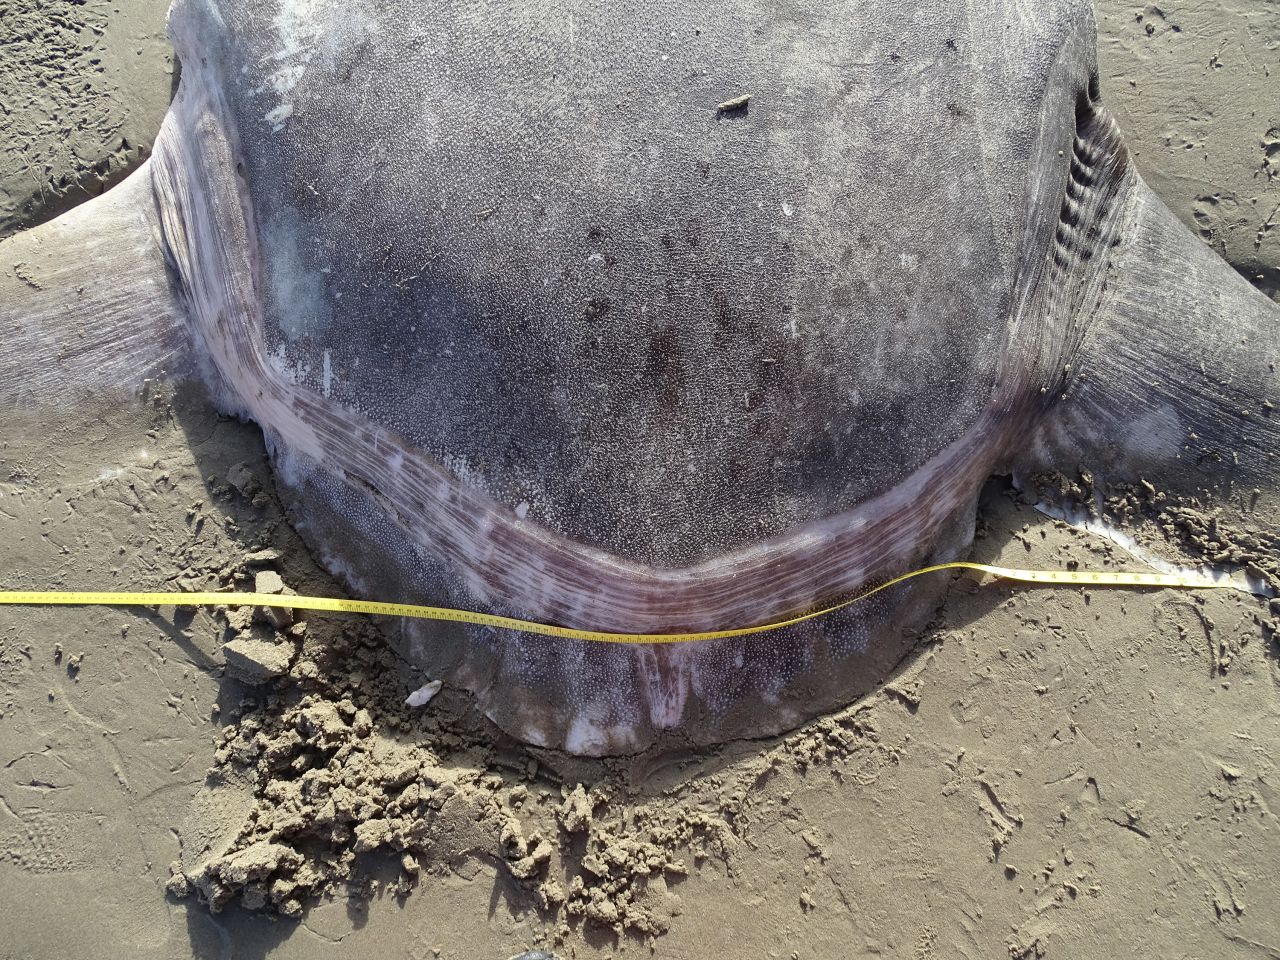 Researchers measured the clavus, which is distinctive in the hoodwinker sunfish.